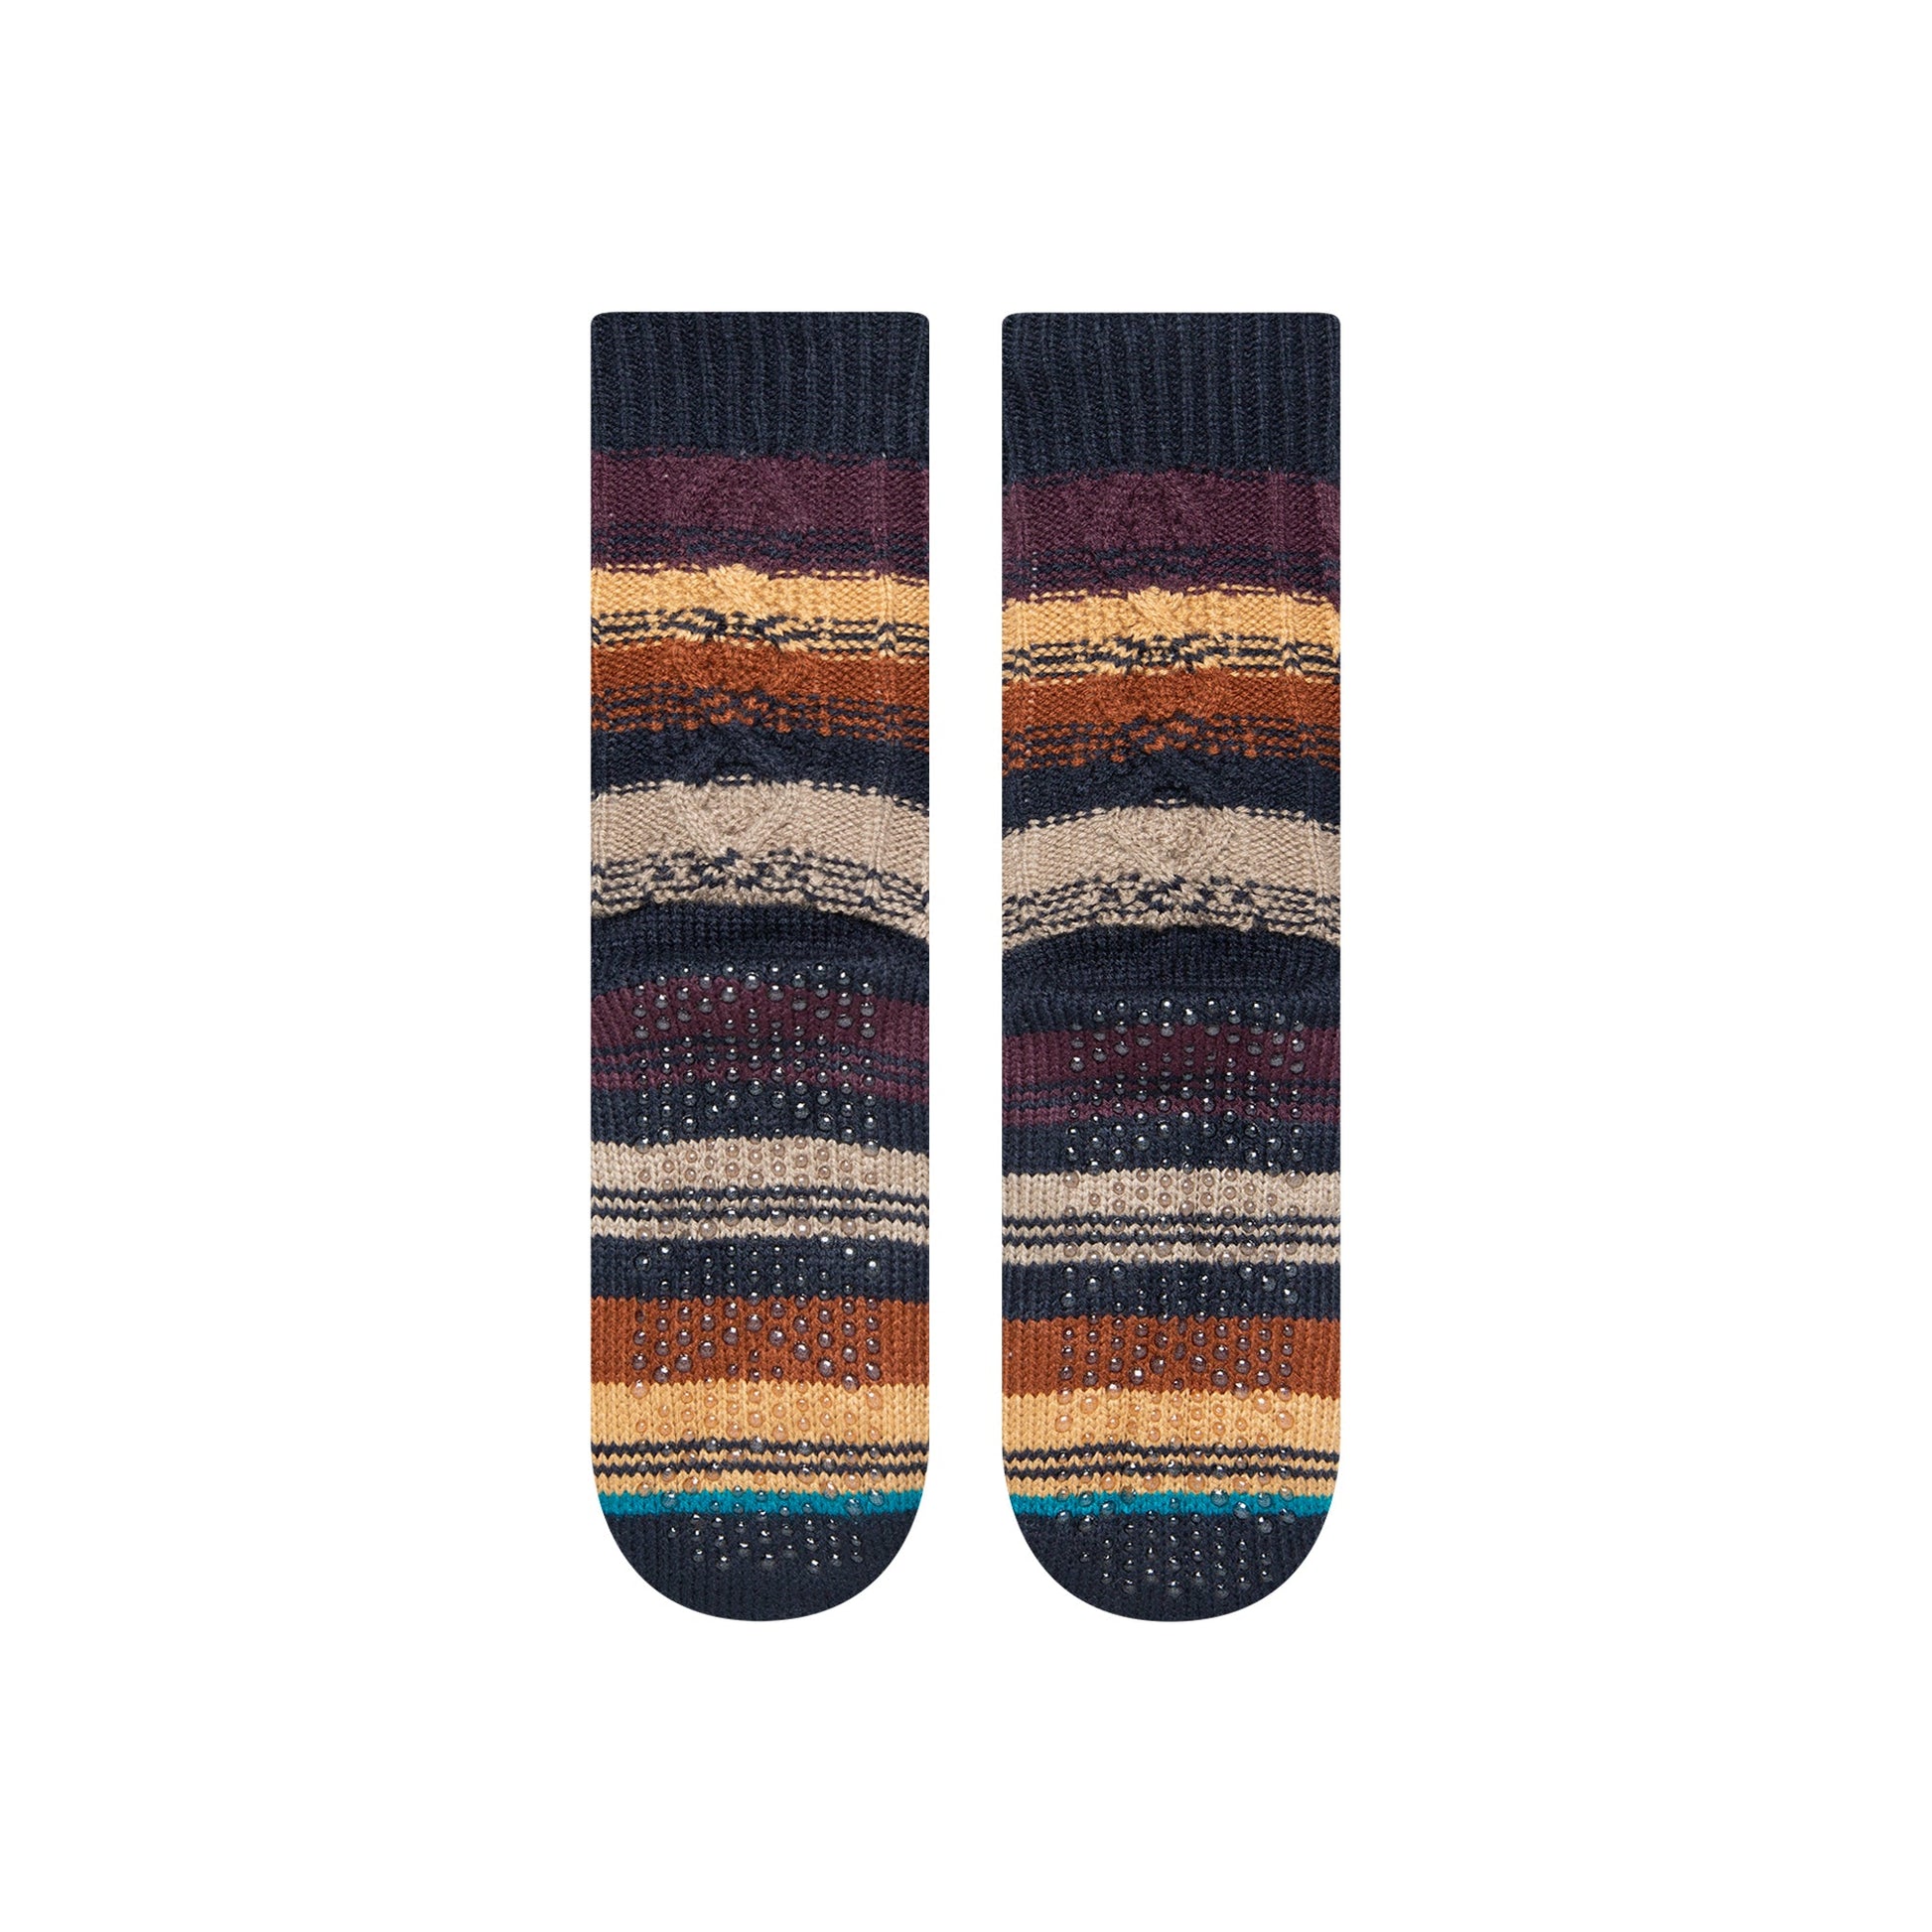 CHAUSSONS CHAUSSETTES Stance TOASTED noir – Stance Europe